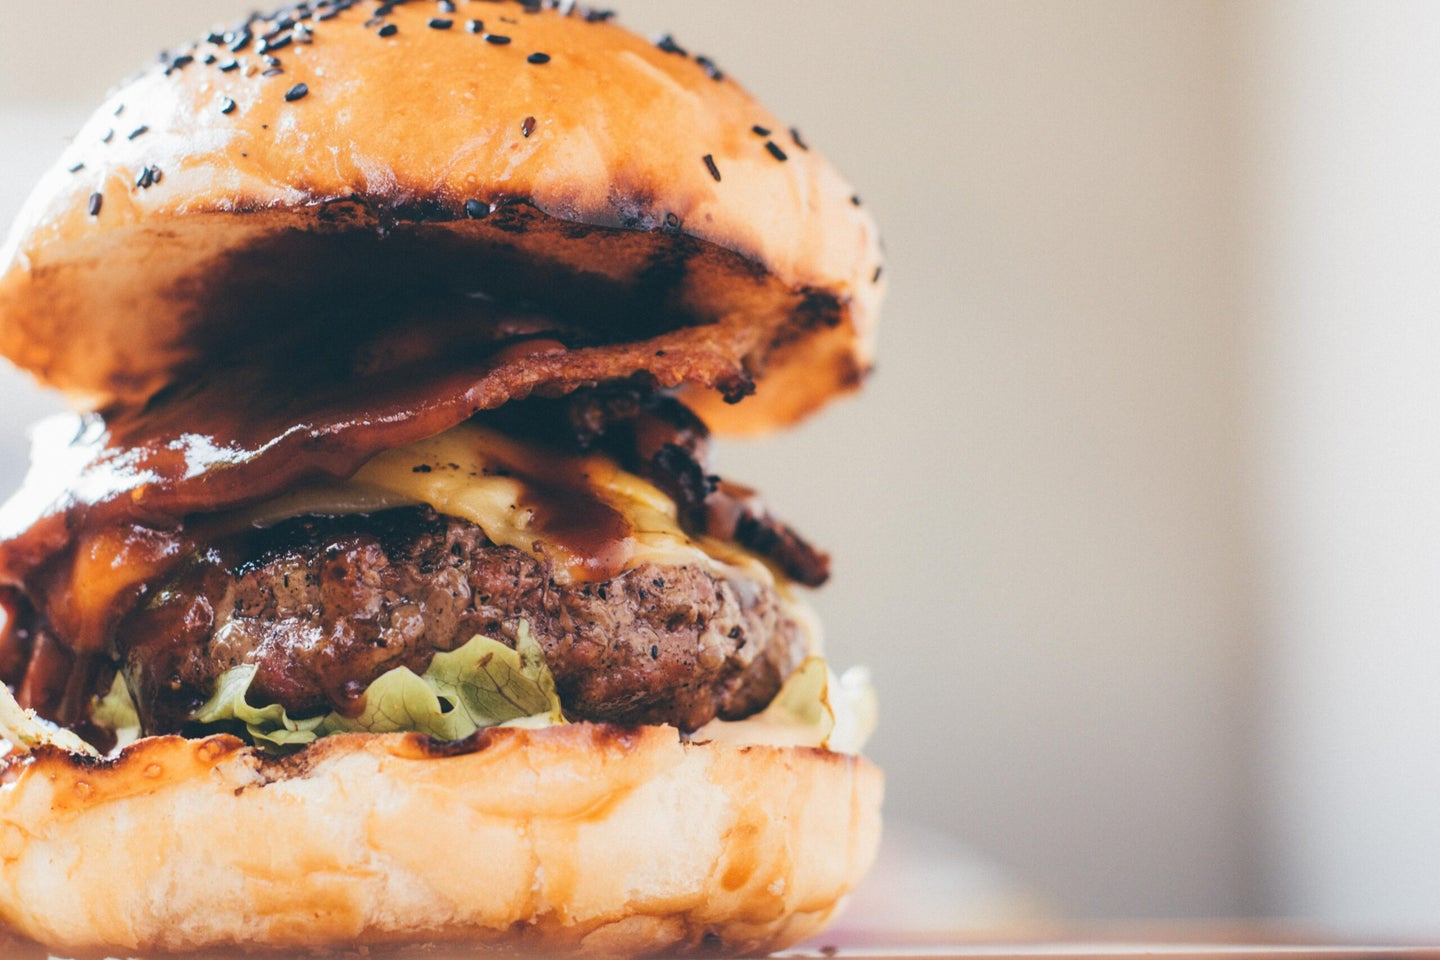 To eat a burger or not is completely up to you. 